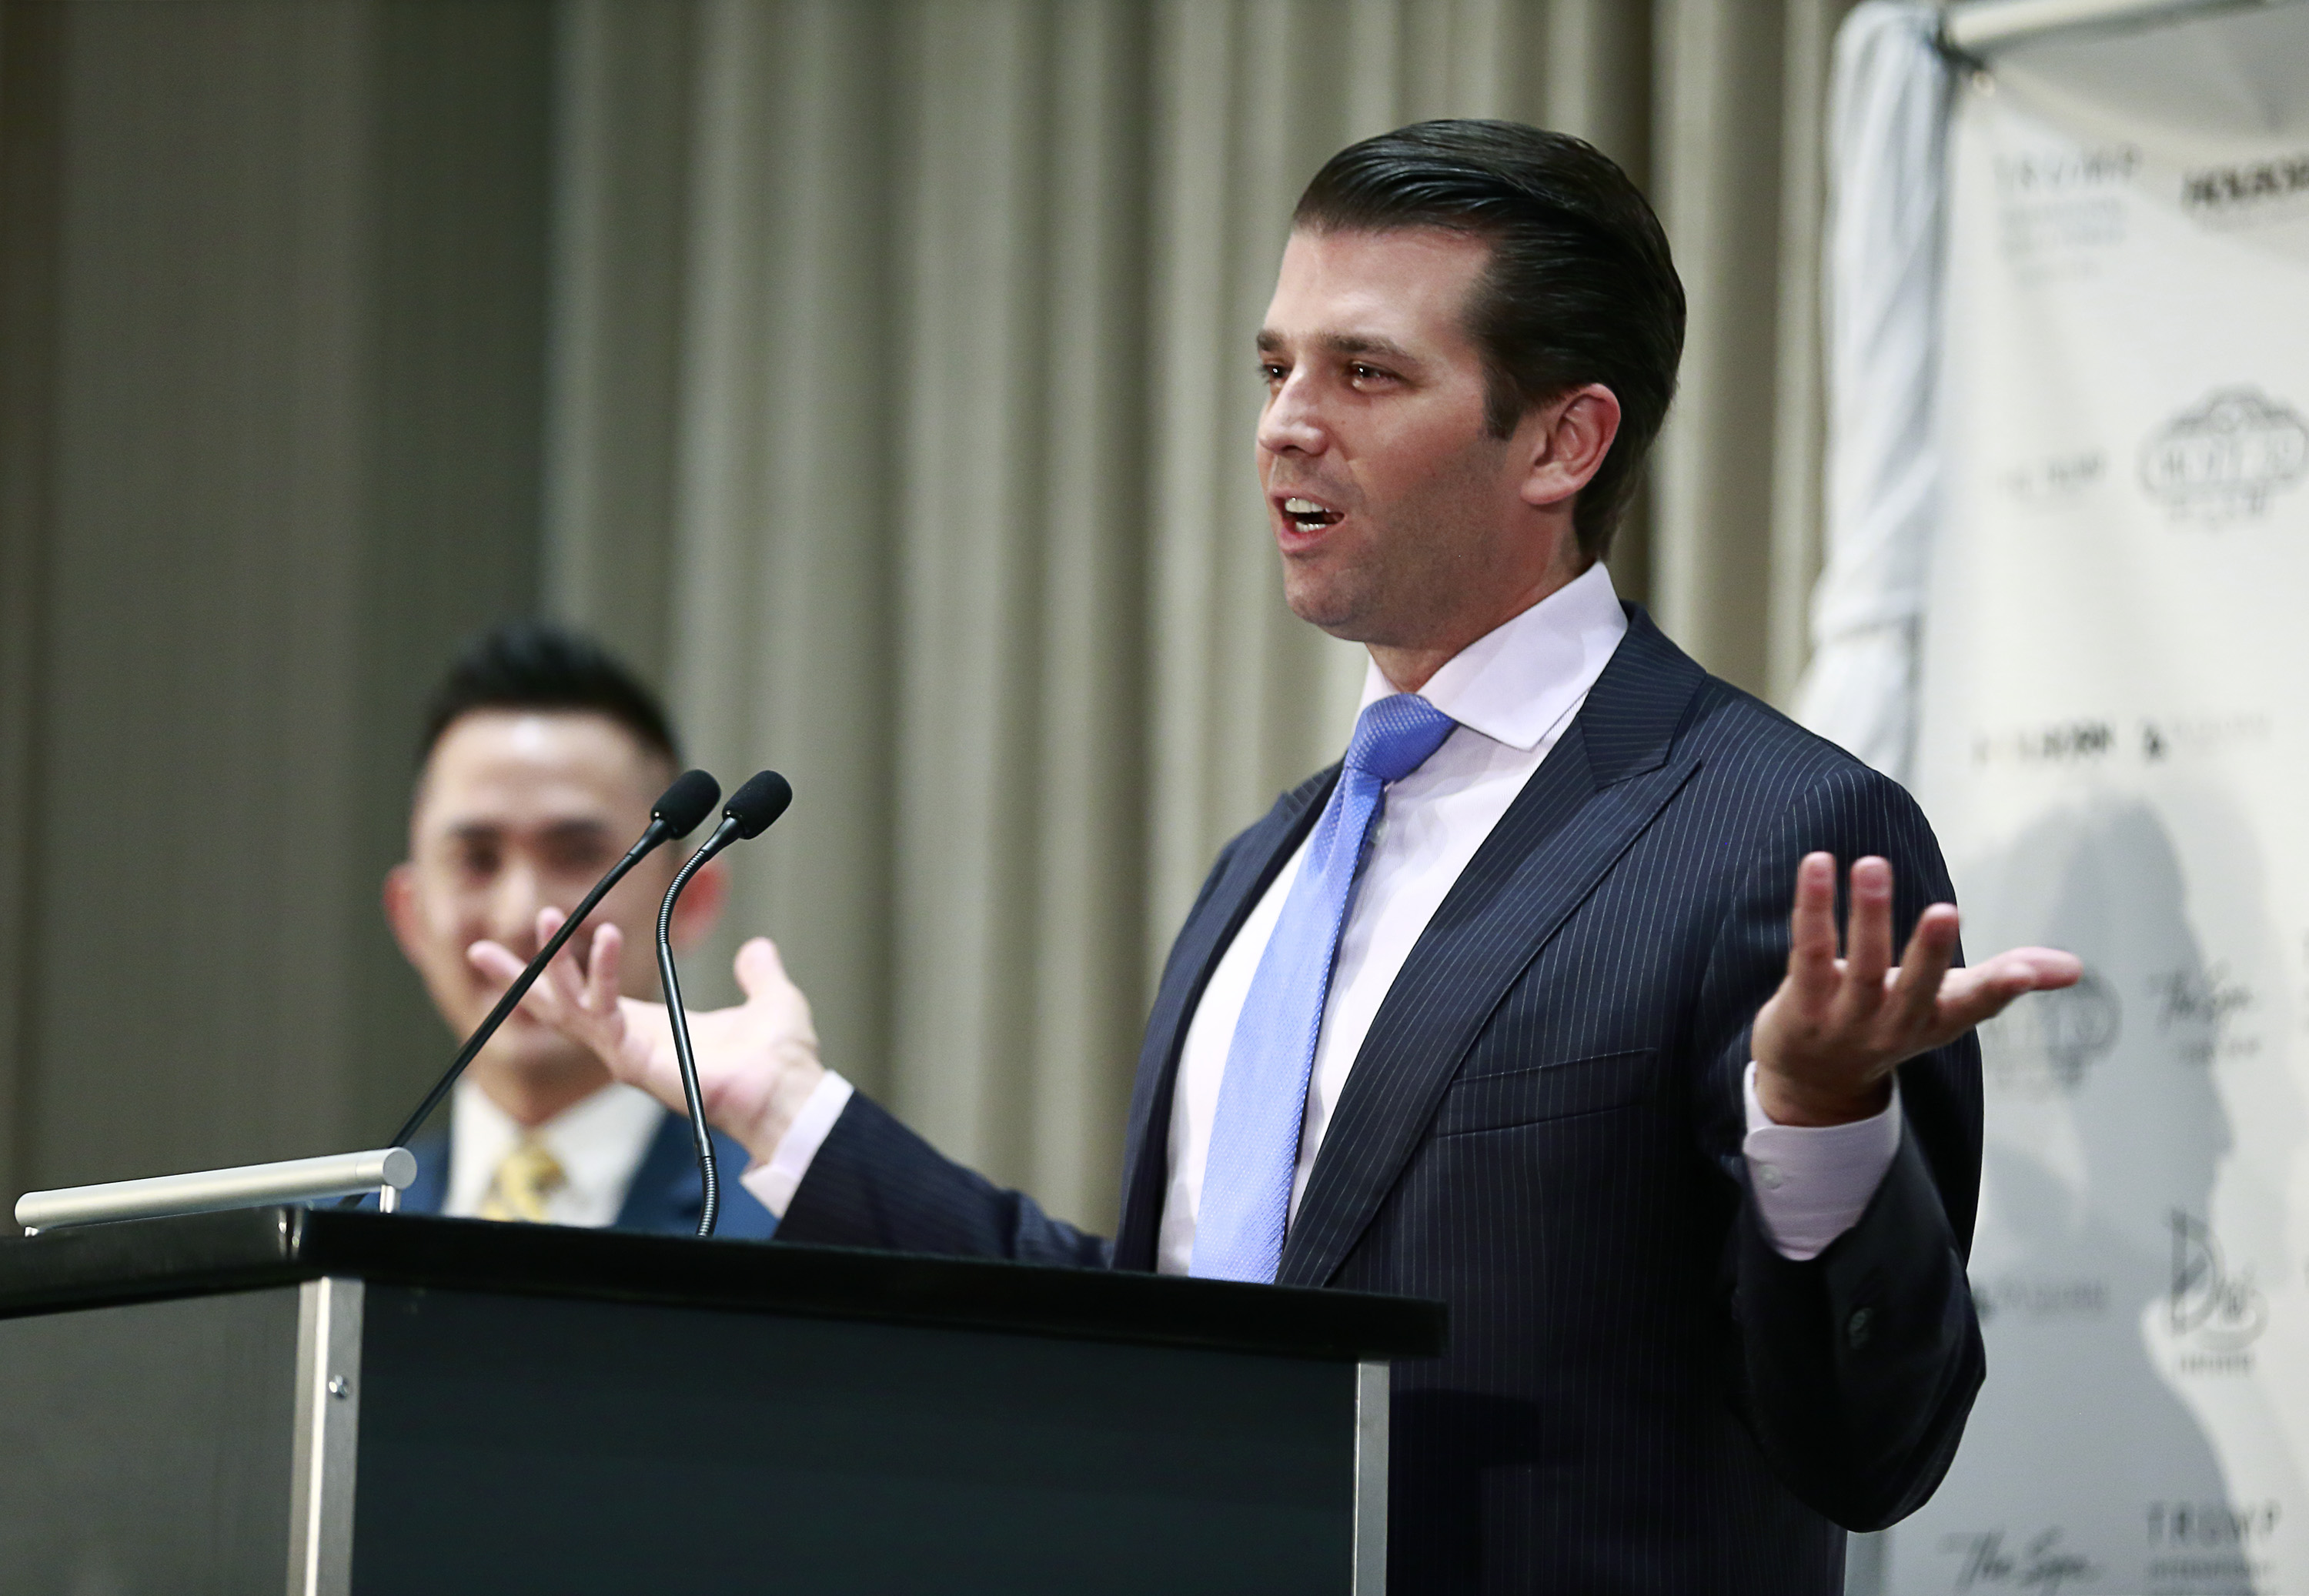 Donald Trump Jr. speaks at a hotel opening in Vancouver